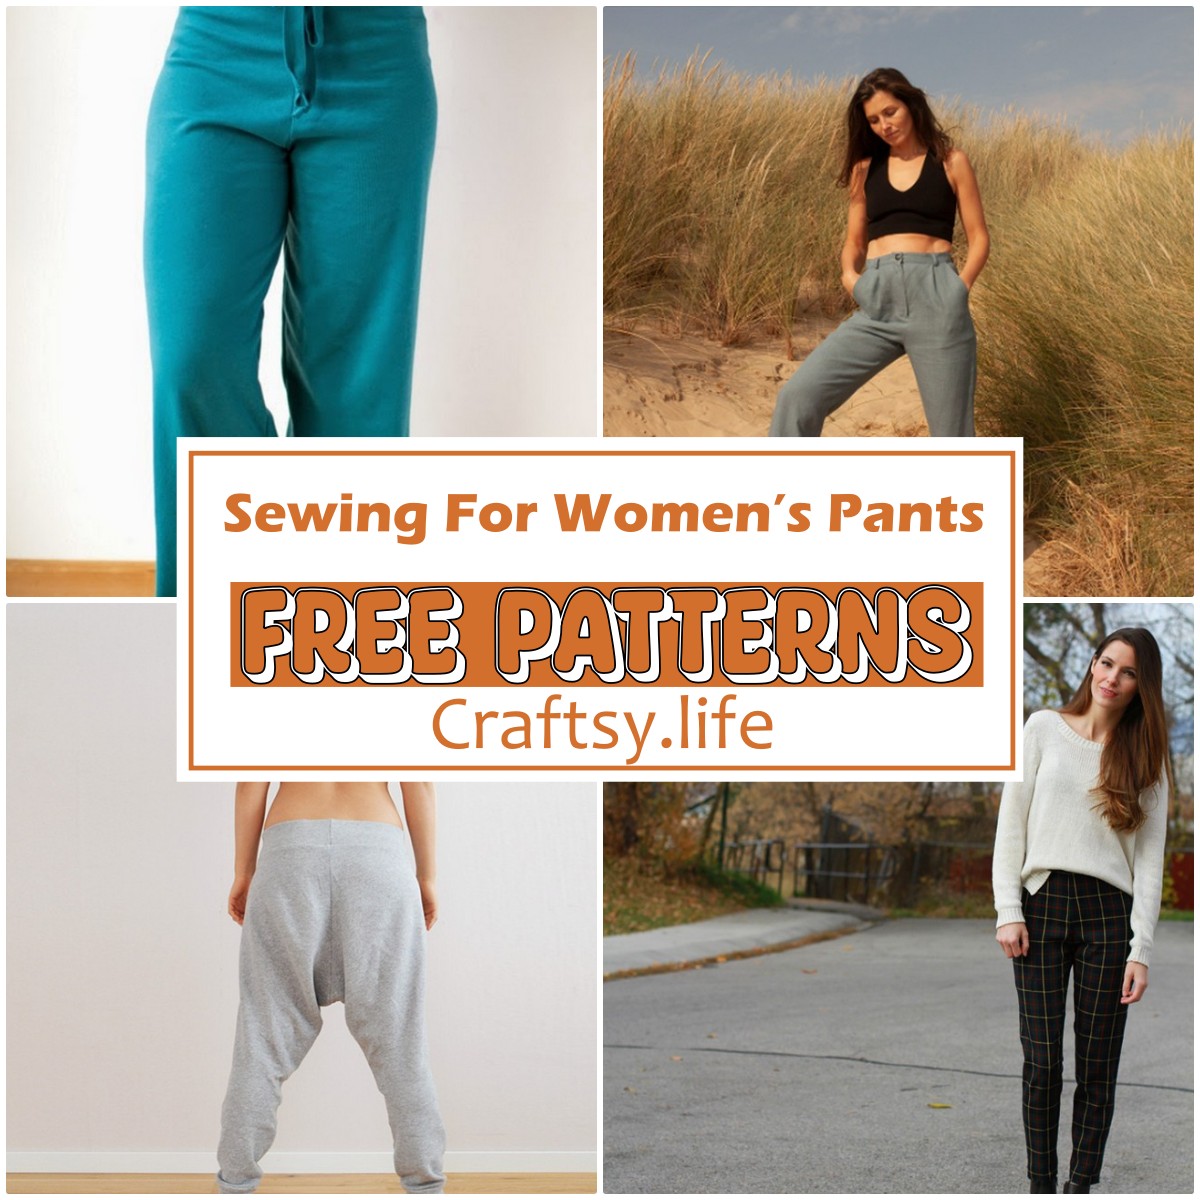 Free Sewing Patterns For Women’s Pants